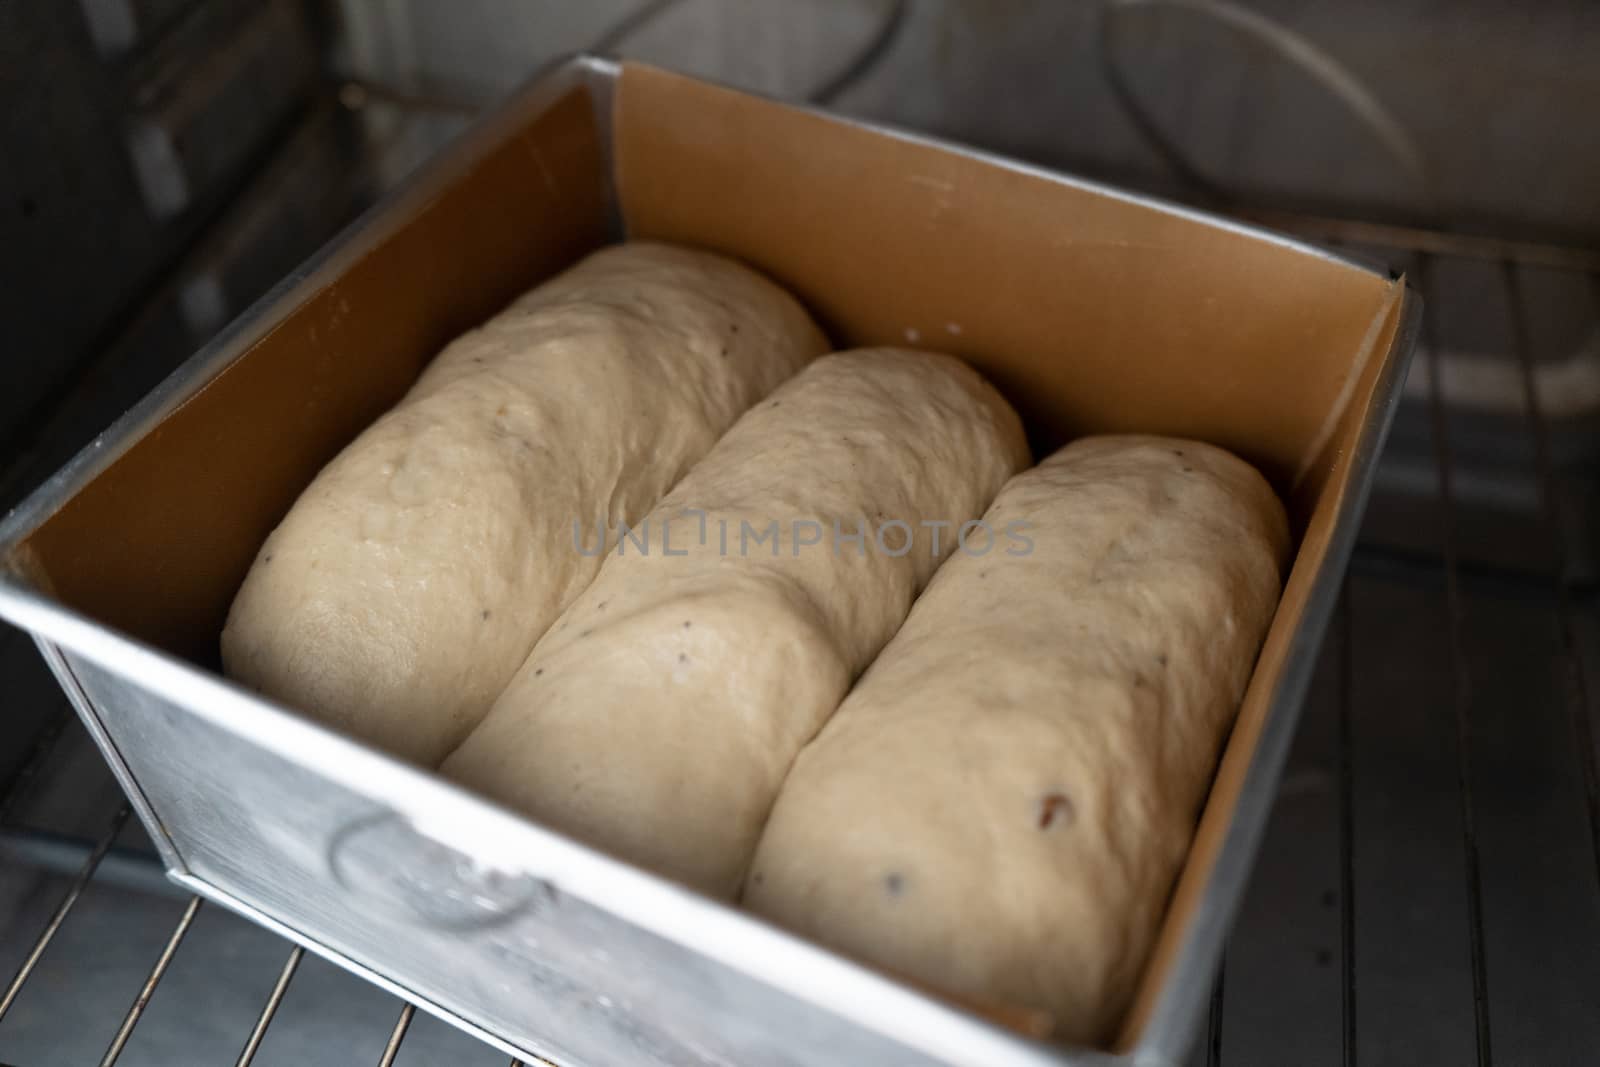 Dough rising inside oven, process bread proofing.